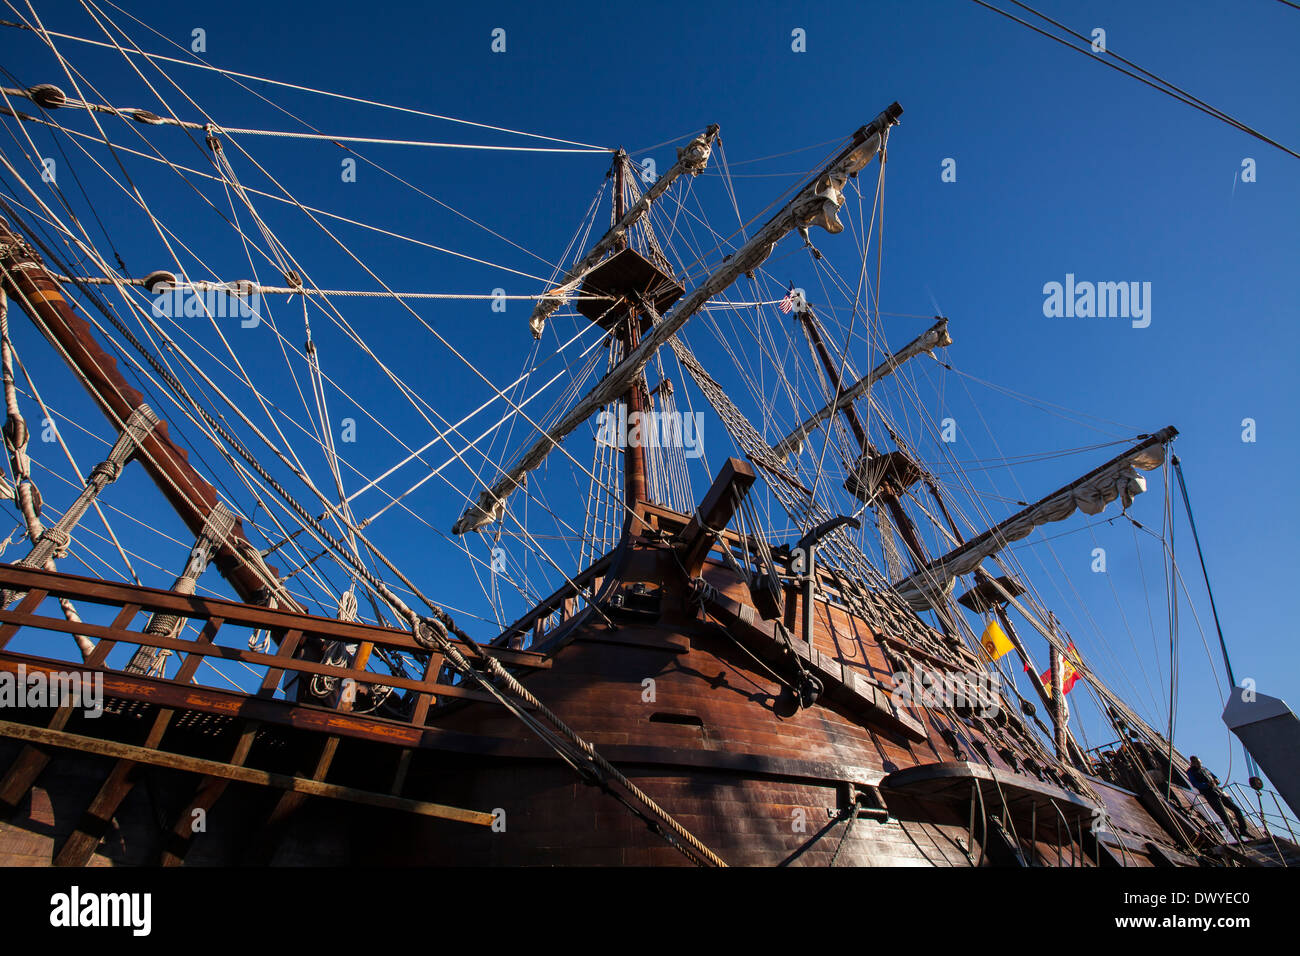 El Galeon Andalucia replica ship is pictured in St. Augustine, Florida Stock Photo